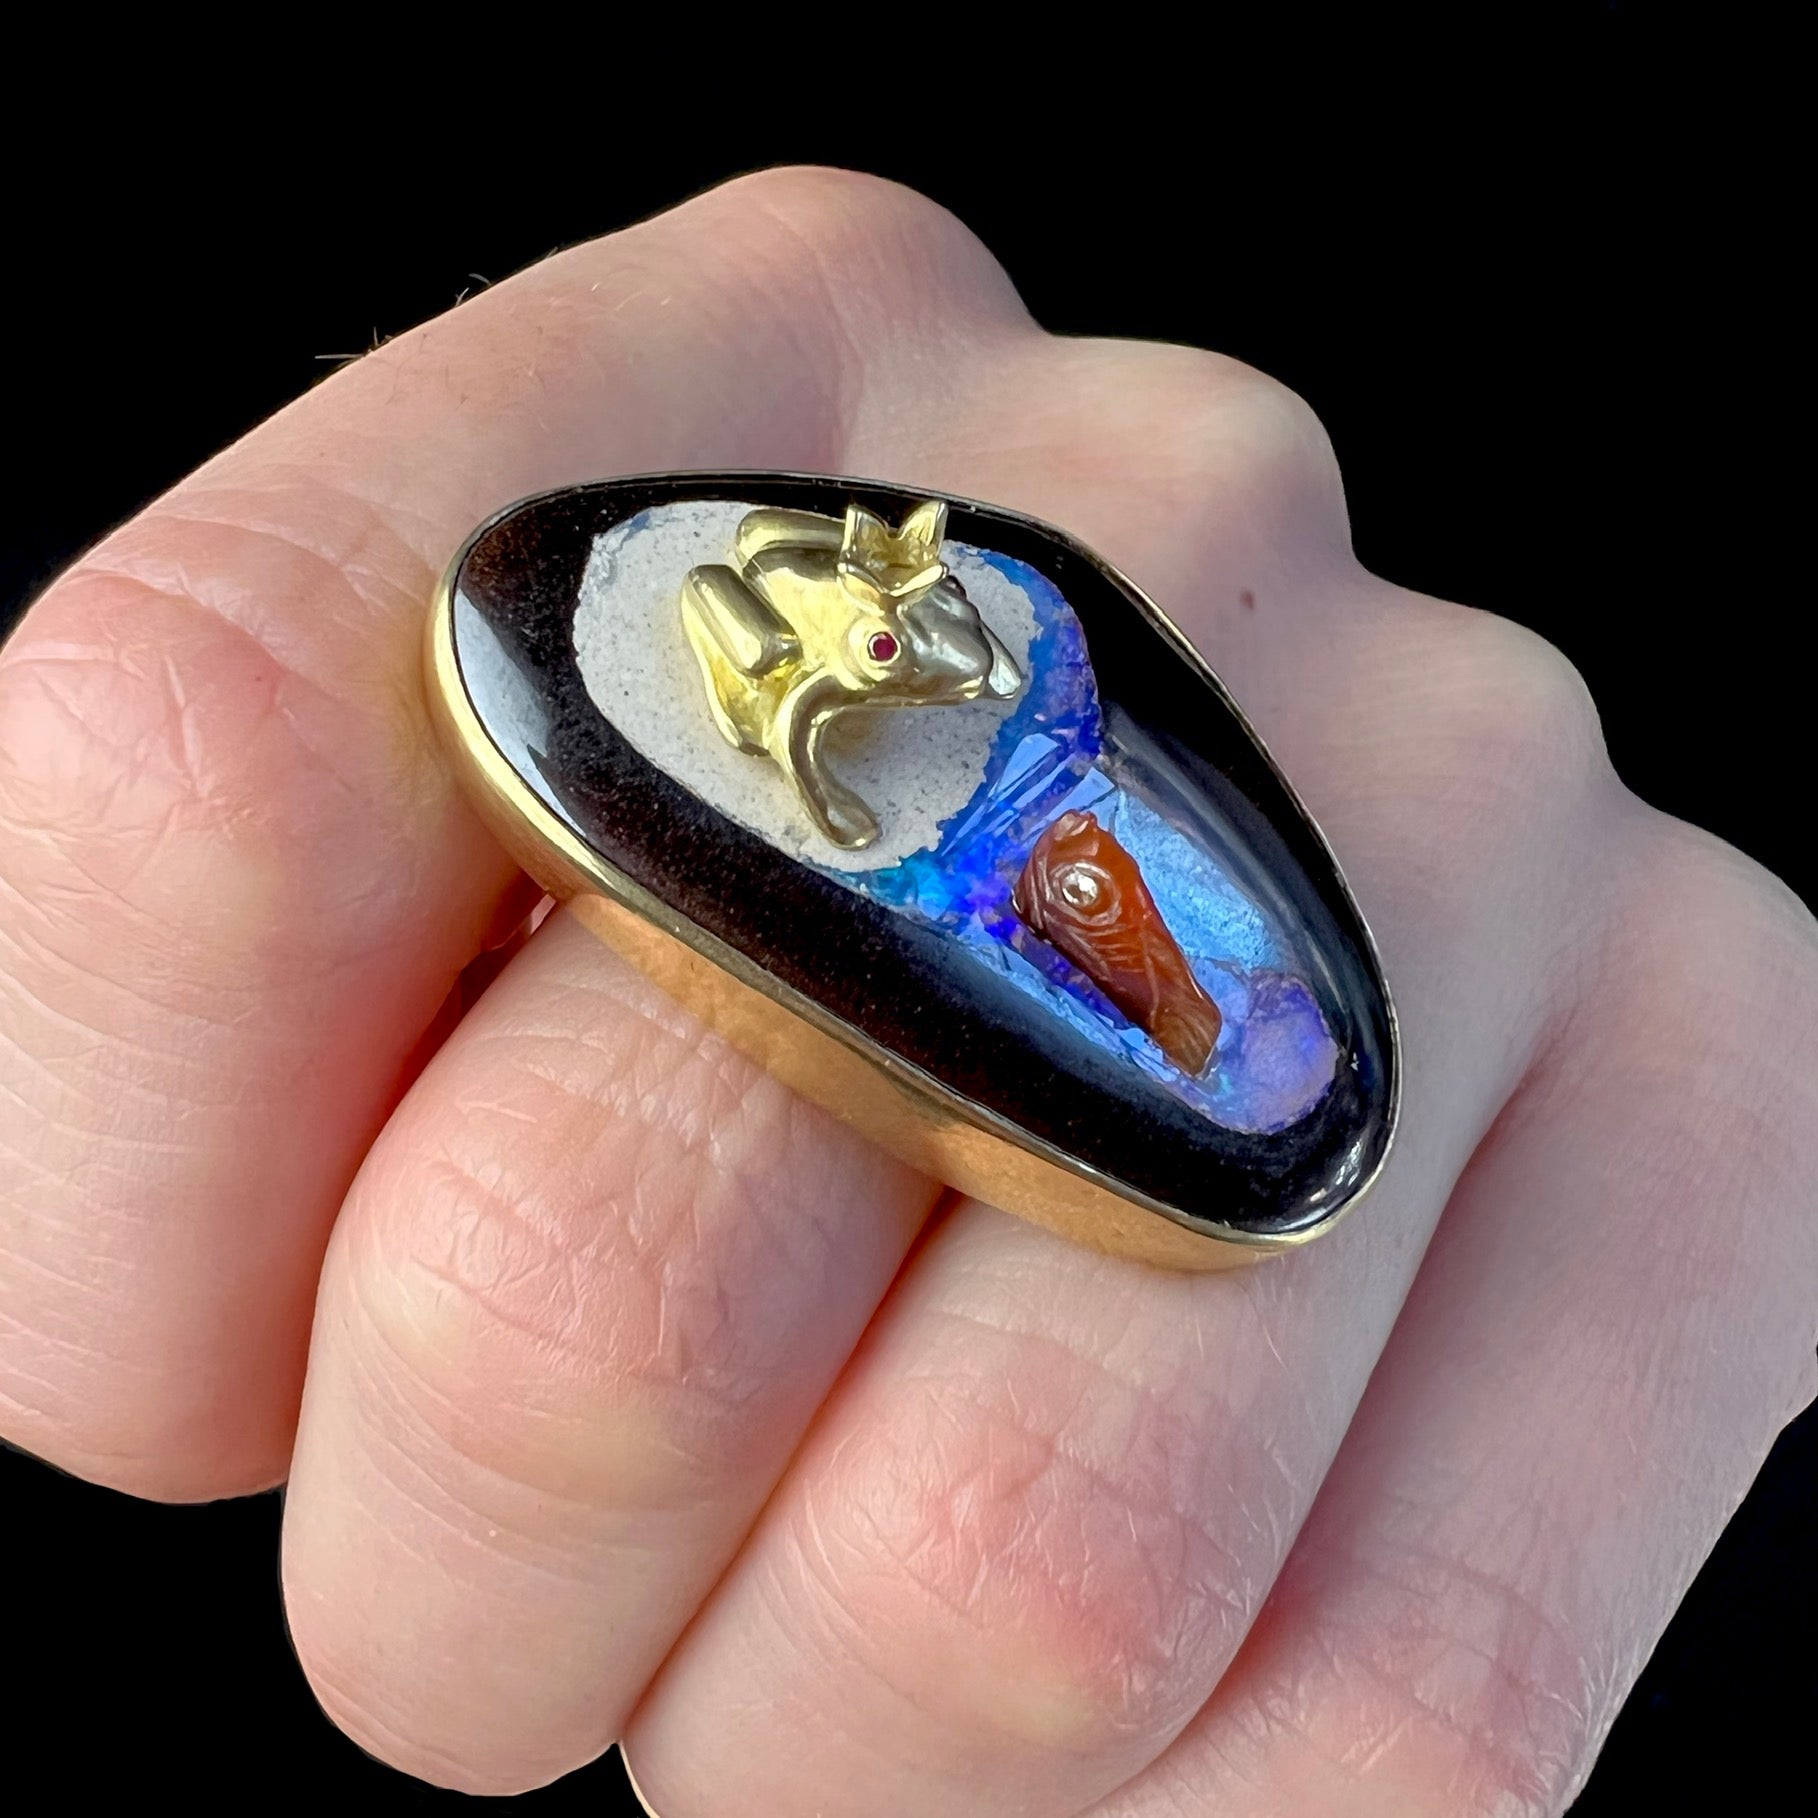 Enchanted Opal Pond Ring worn on finger for size